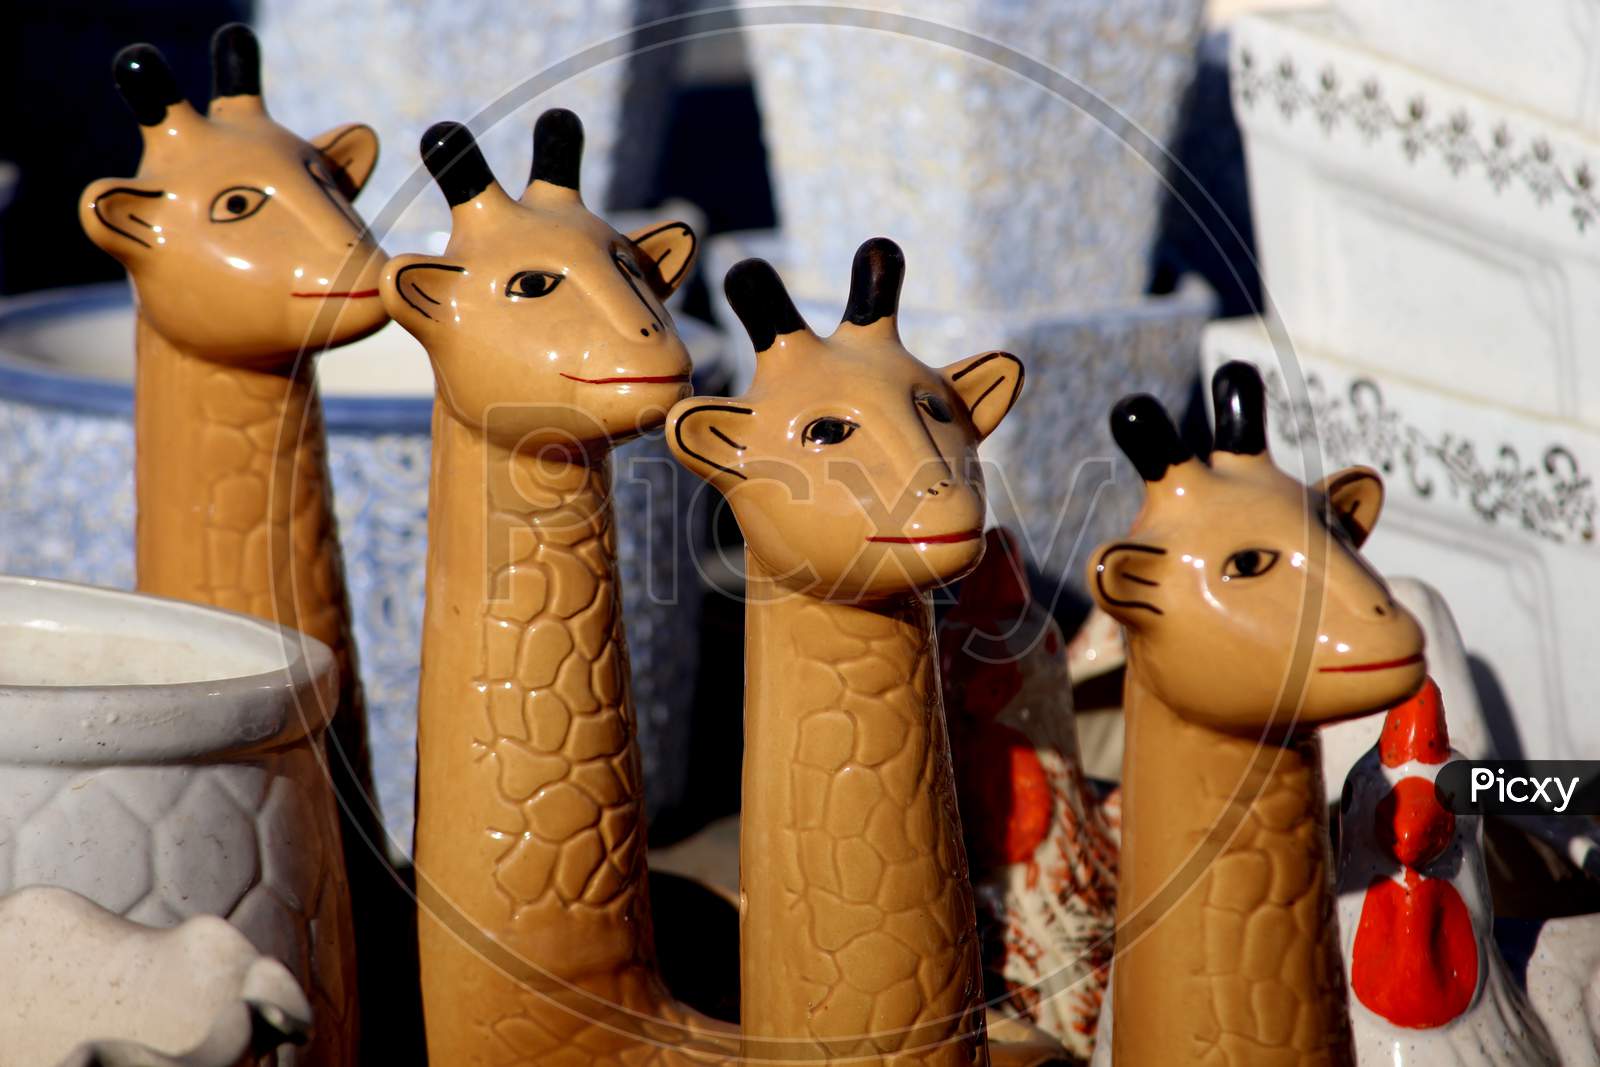 Home Decorative Items Of Earthenware Or Ceramic at a Vendor Stall